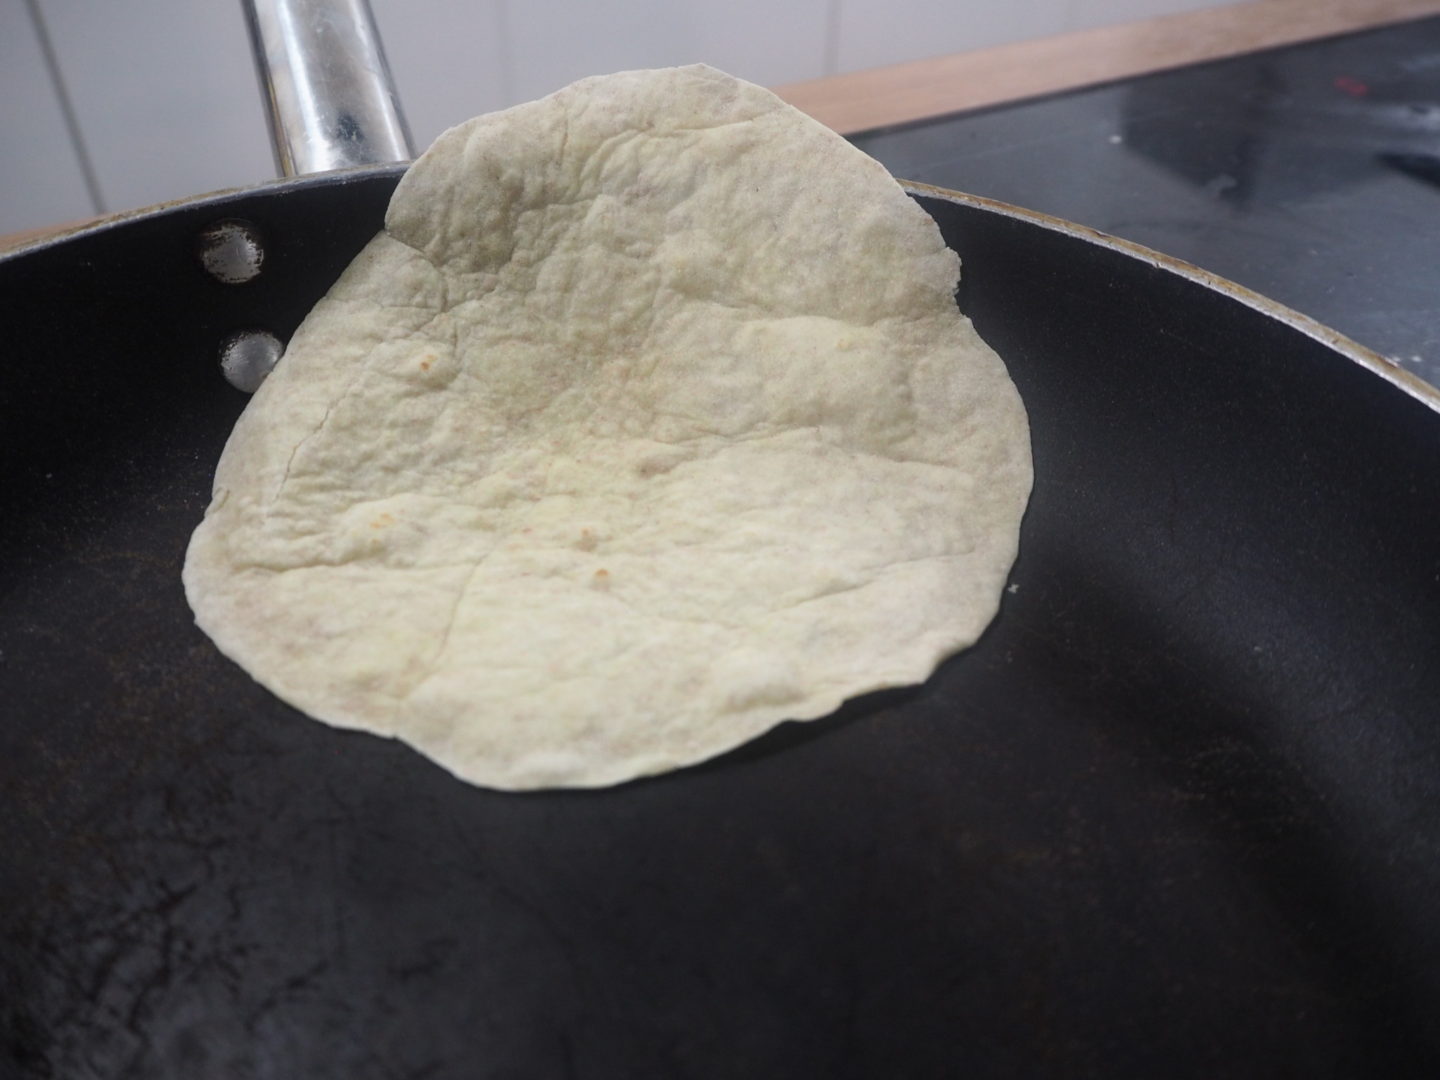 Cooking the flatbreads